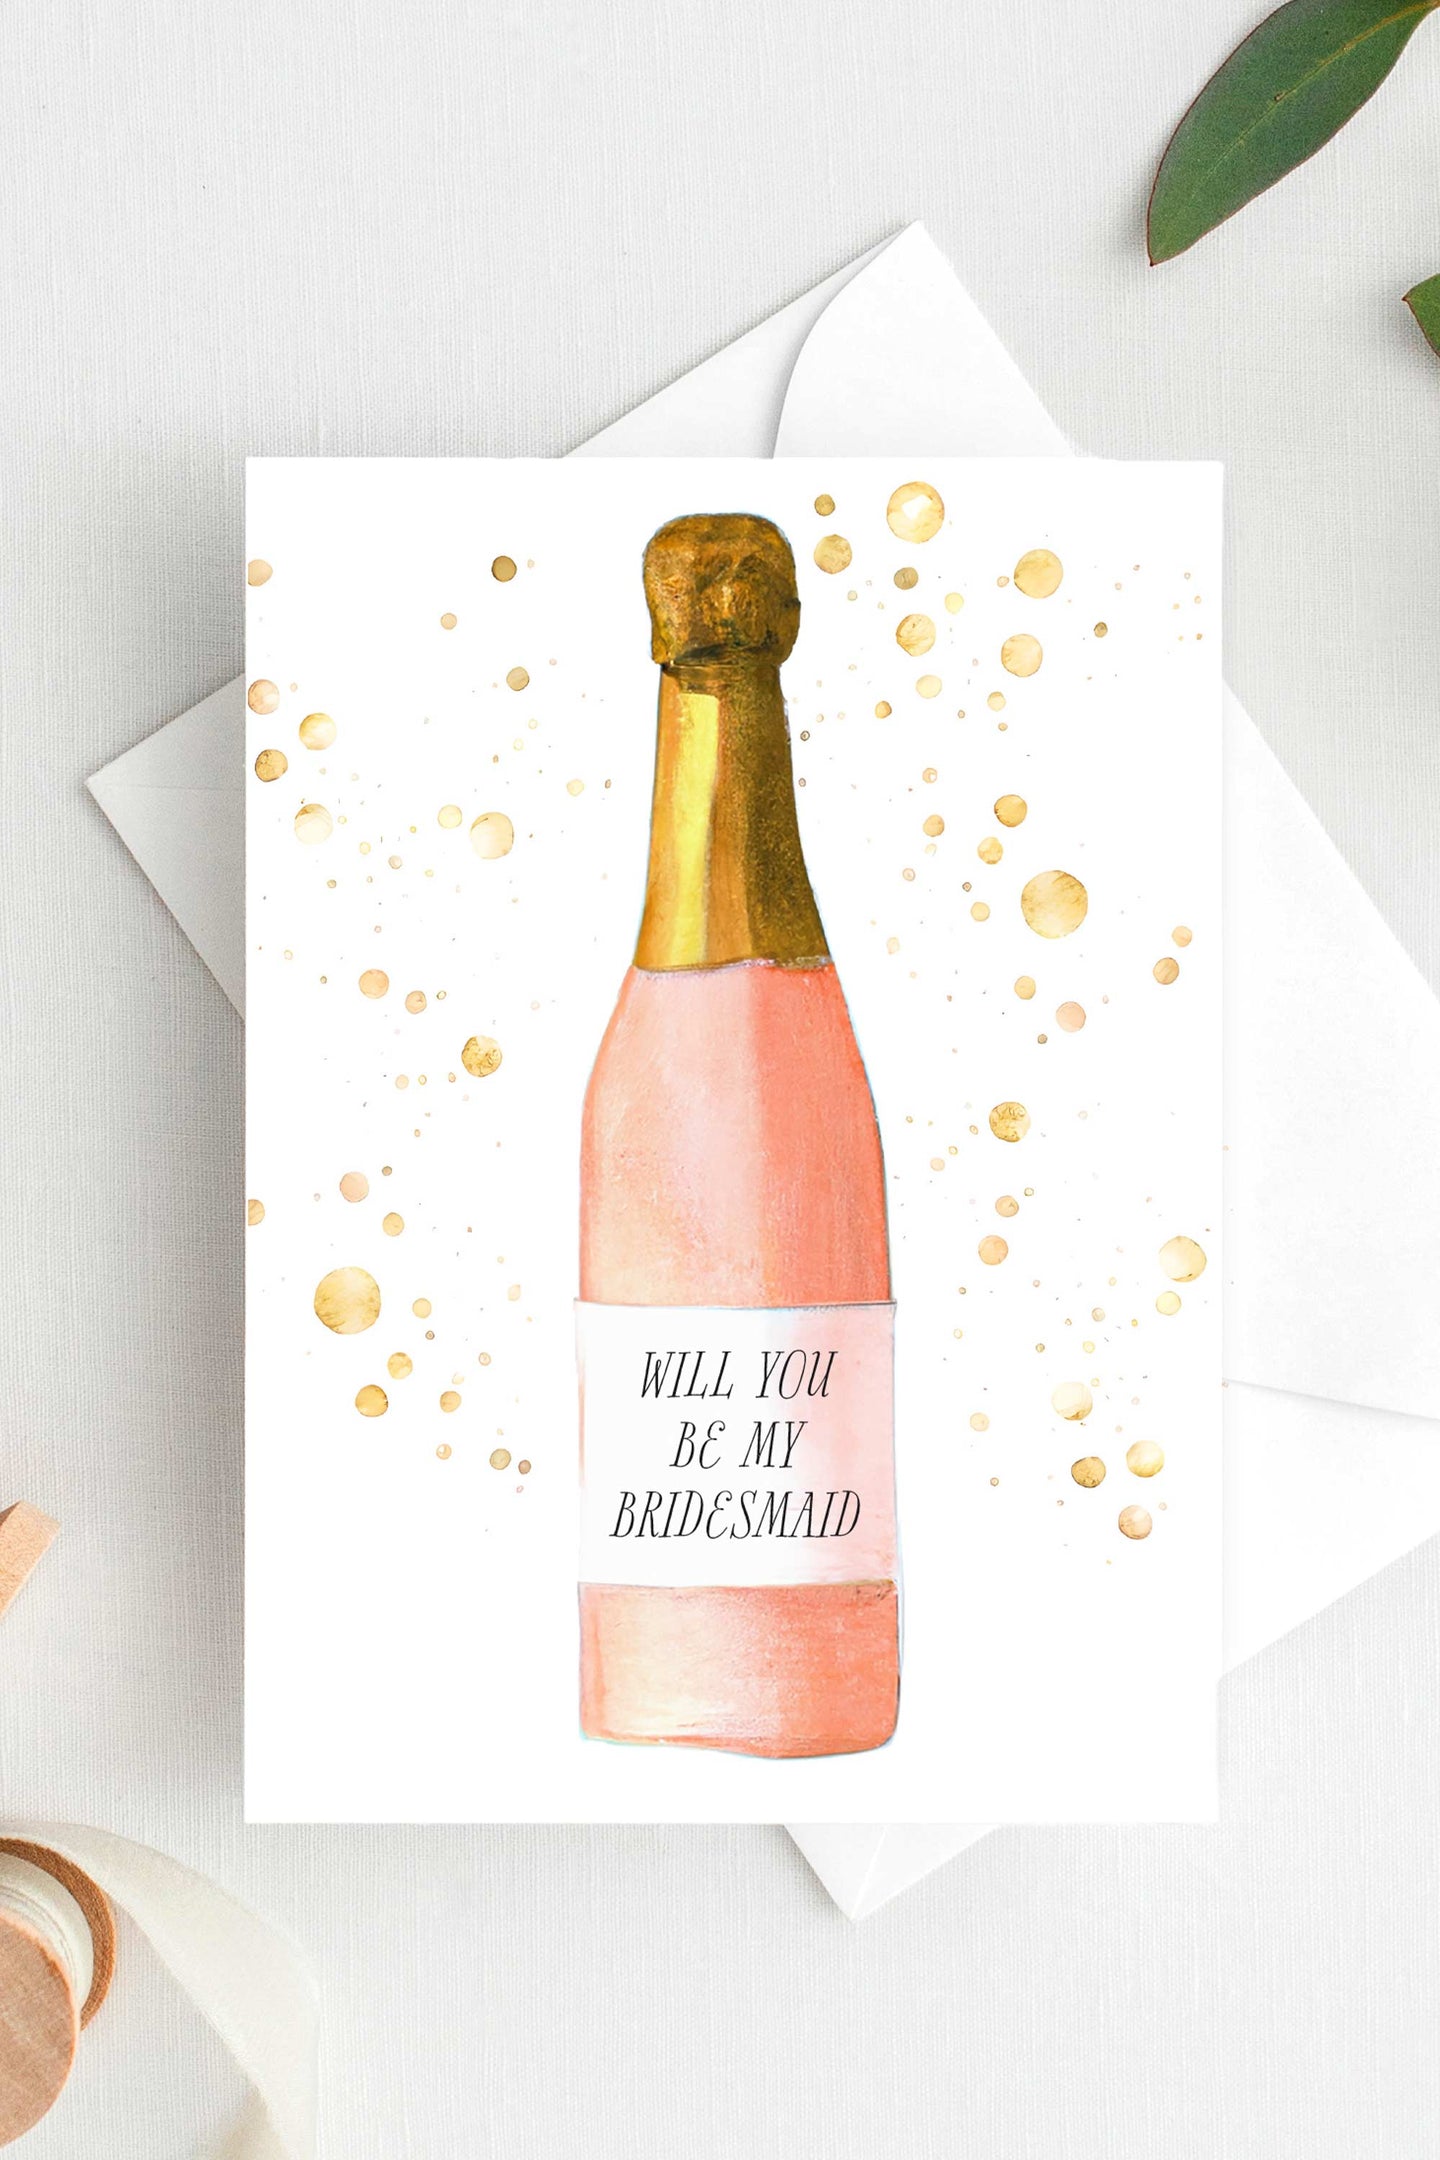 Will You Be My Bridesmaid Proposal Card Watercolor Pink Champagne Bottle